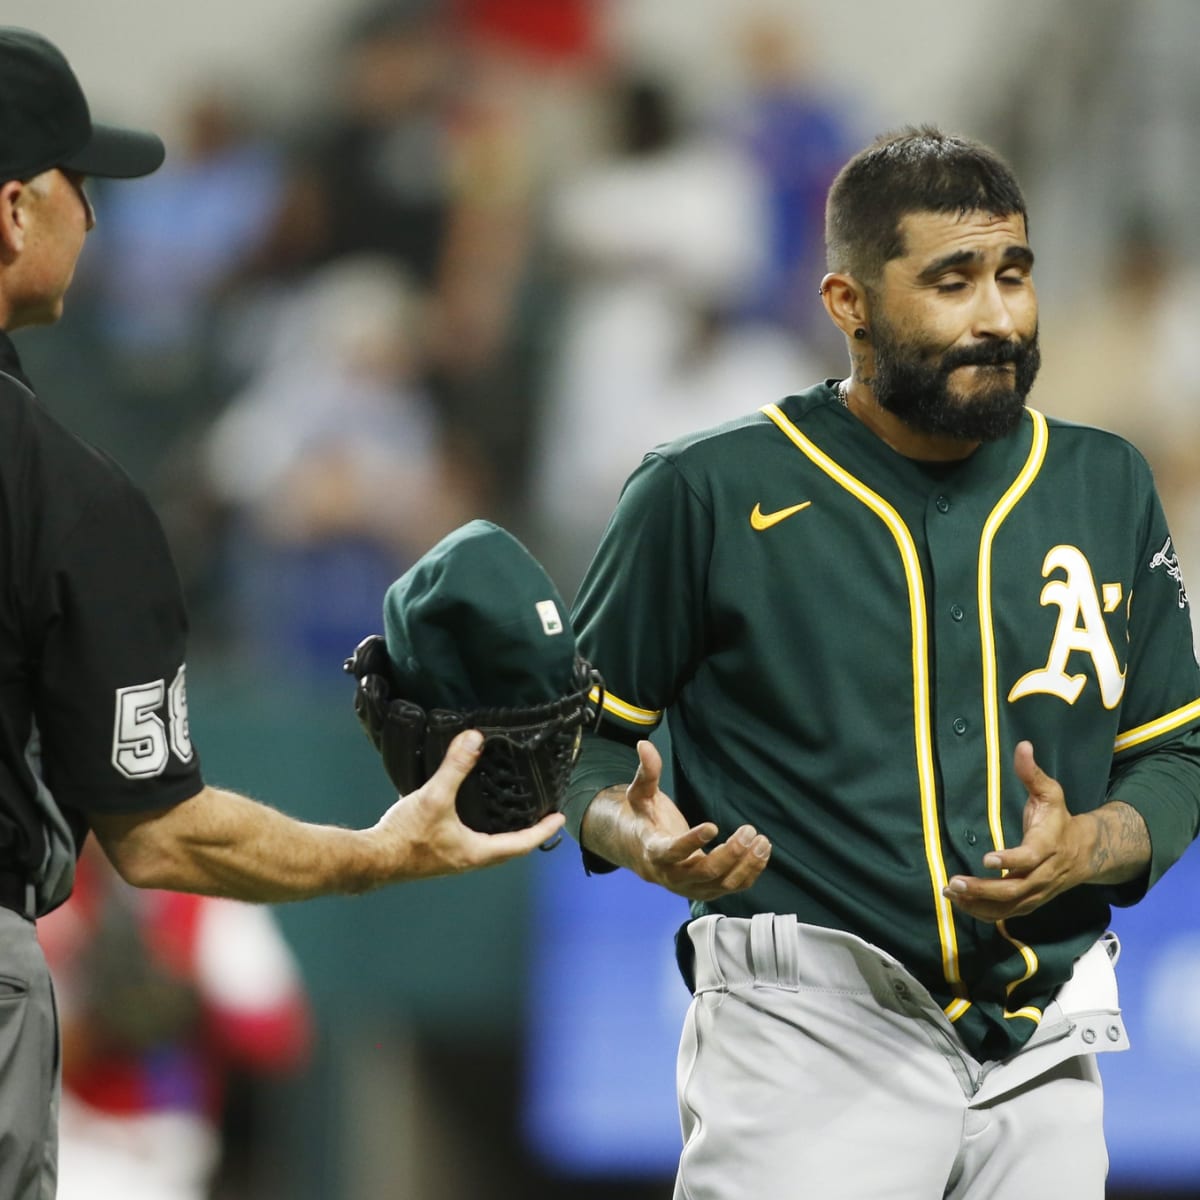 Sergio Romo pulls down pants during sticky stuff inspection (video